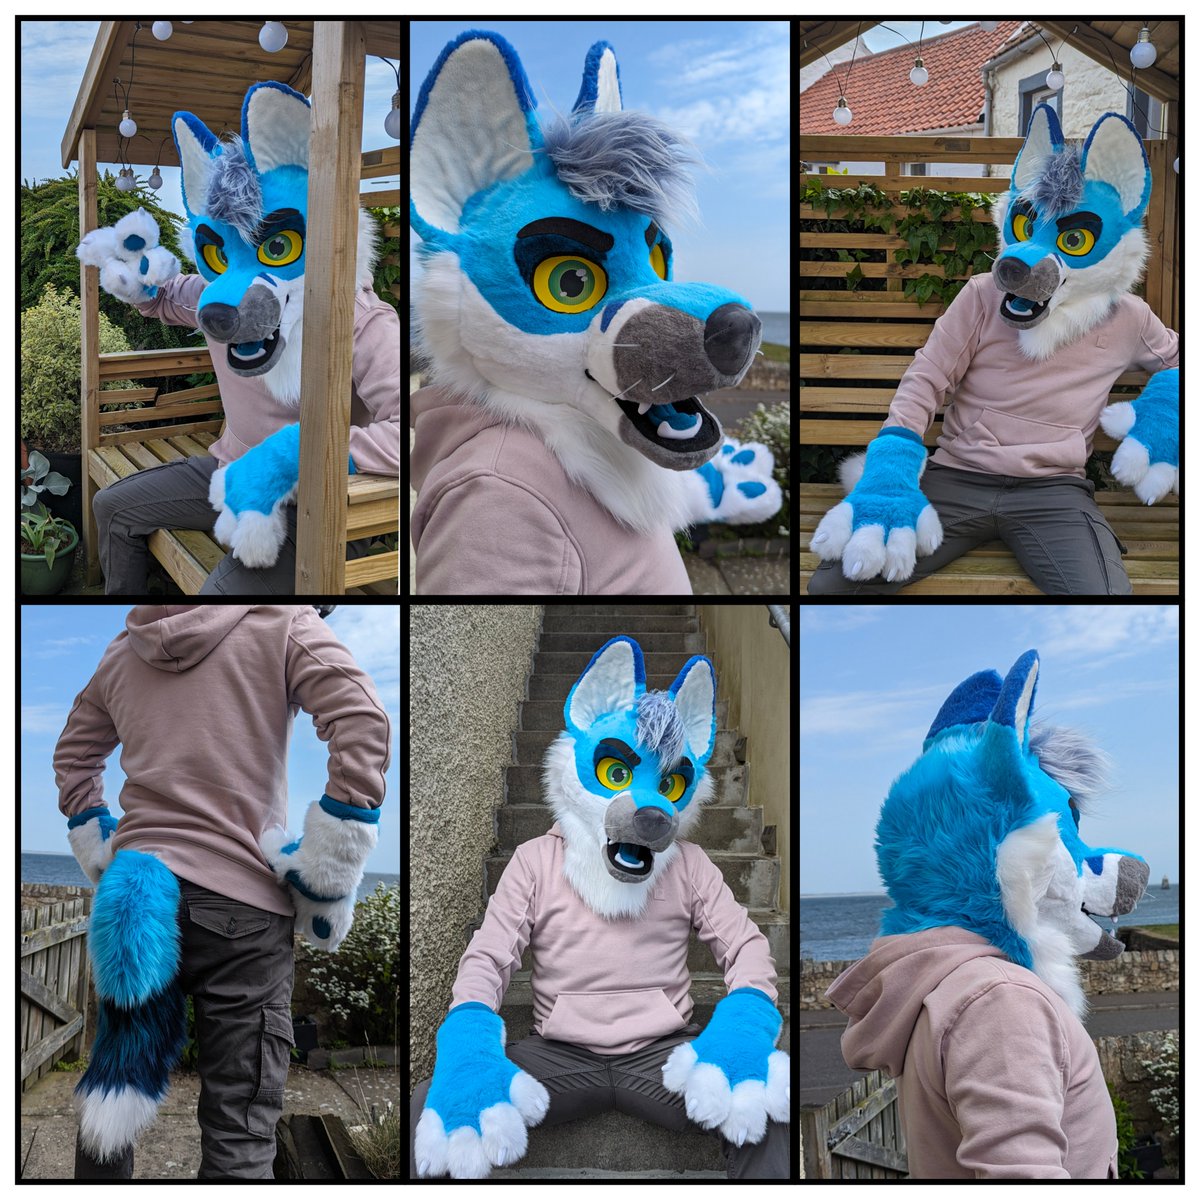 This handsome fox will be for sale at my @cfconvention @CFzDealers Dealers Den Table (B-06/B-07) Will comfortably fit up to 23.5' heads (can be altered after con) and features sublimated eyes so they'll never fade! #fursuit #FursuitFriday #cassiuscrafts #confuzzled